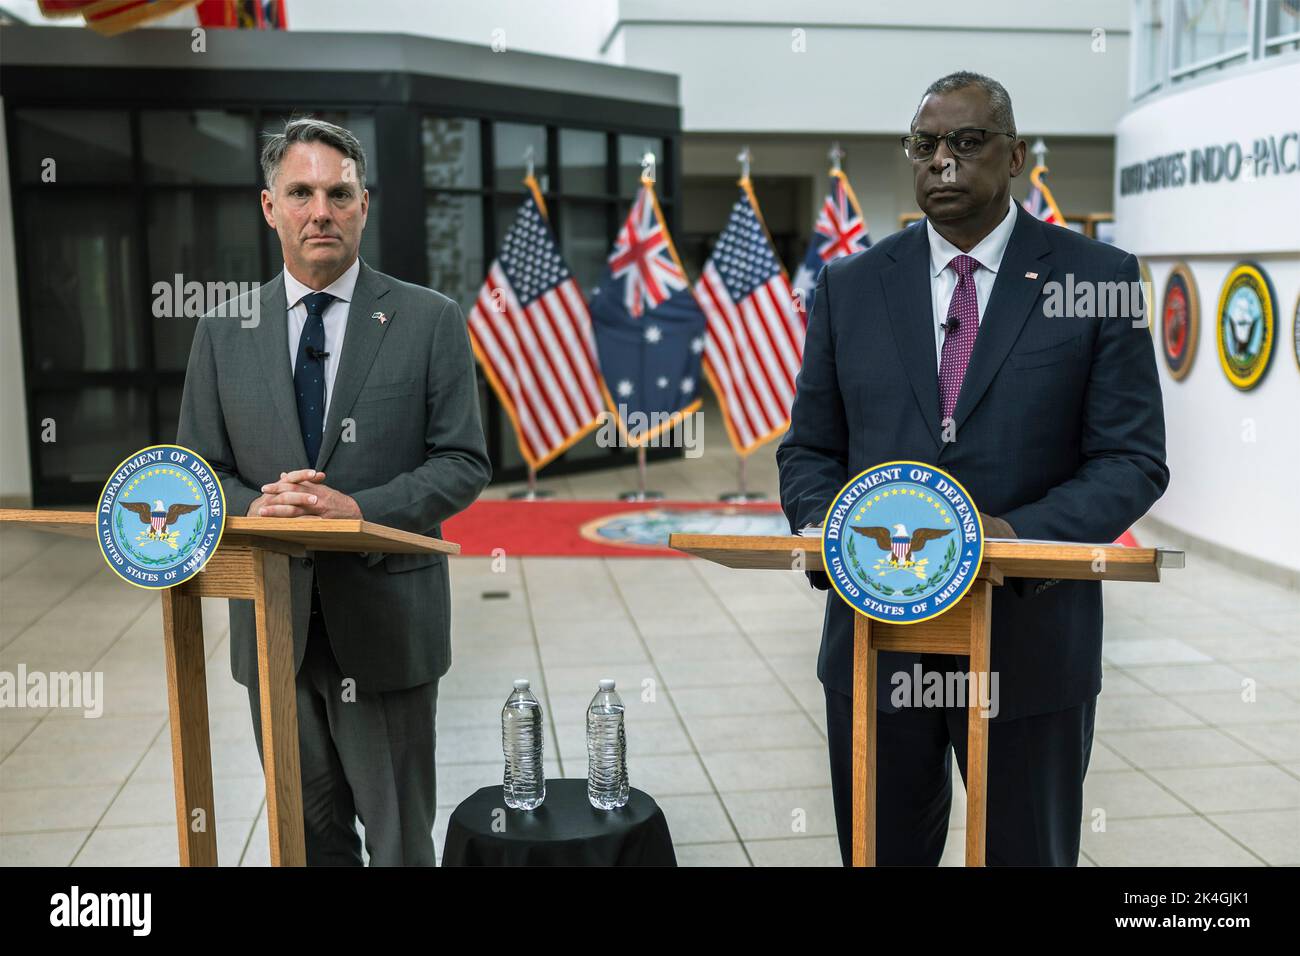 Aiea, United States Of America. 01st Oct, 2022. Aiea, United States of America. 01 October, 2022. U.S. Secretary of Defense Lloyd J. Austin III, right, listens to a question during a press conference at the conclusion of trilateral talks with Australian Minister of Defense Richard Marles, left, and Japanese Minister of Defense Yasukaza Hamada, at the Indo-Pacific Command, Camp Smith, October 1, 2022 in Aiea, Oahu, Hawaii. Credit: Chad J. McNeeley/DOD/Alamy Live News Stock Photo